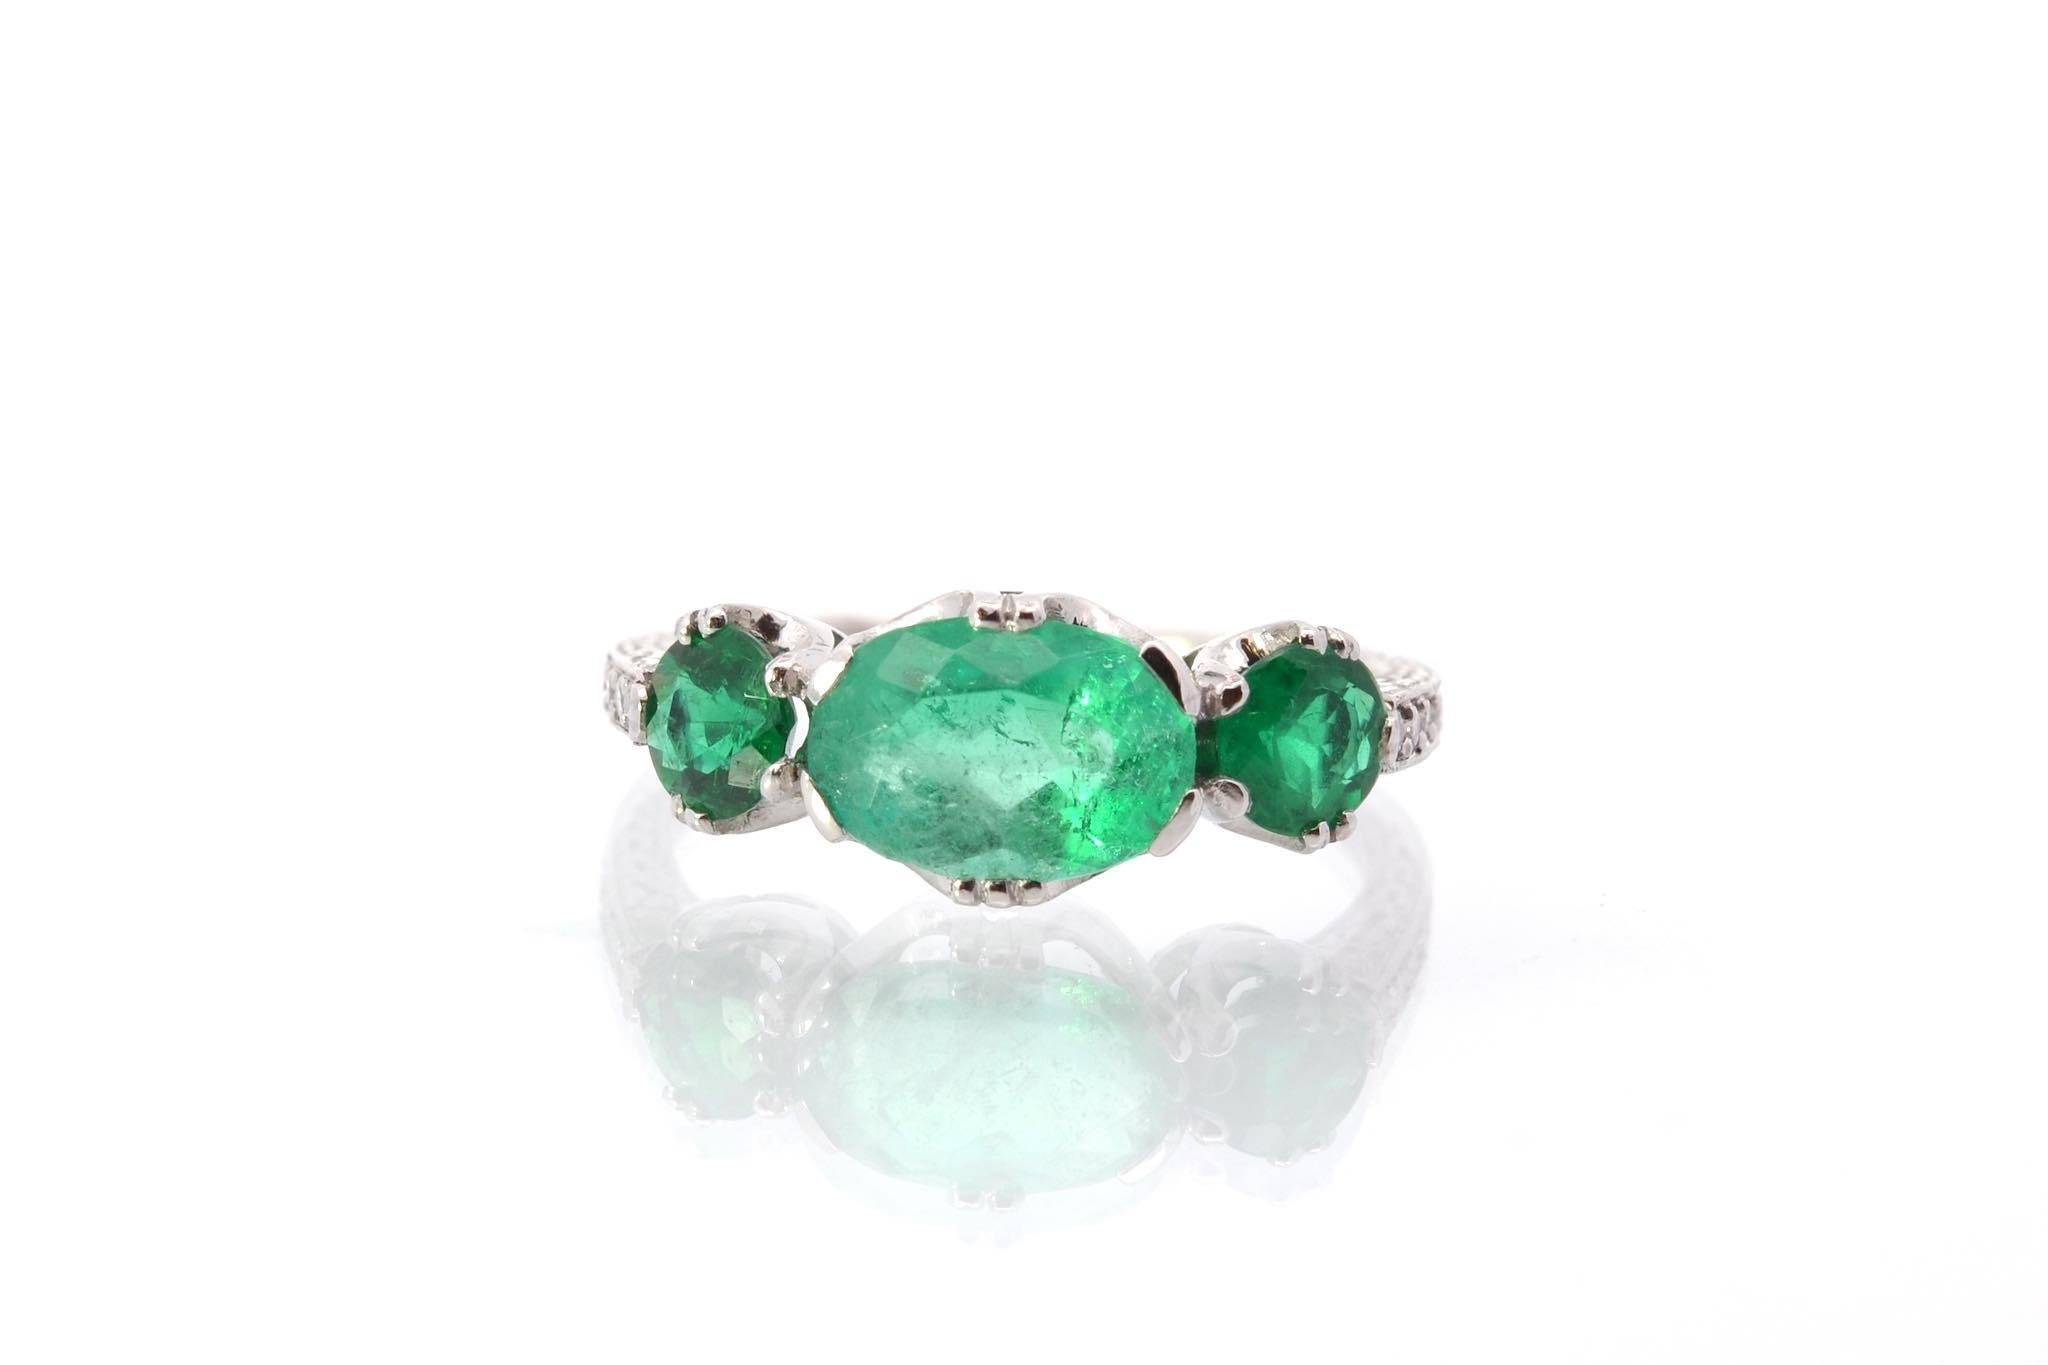 Stones: 1 emerald of 1.35 cts, 2 emeralds of 0.70 ct and 8 old cut diamonds: 0.15 ct.
Material: Platinum
Weight: 3.8g
Period: Recent vintage style (handmade)
Size: 53 (free sizing)
Certificate
Ref. : 23335-25391
​